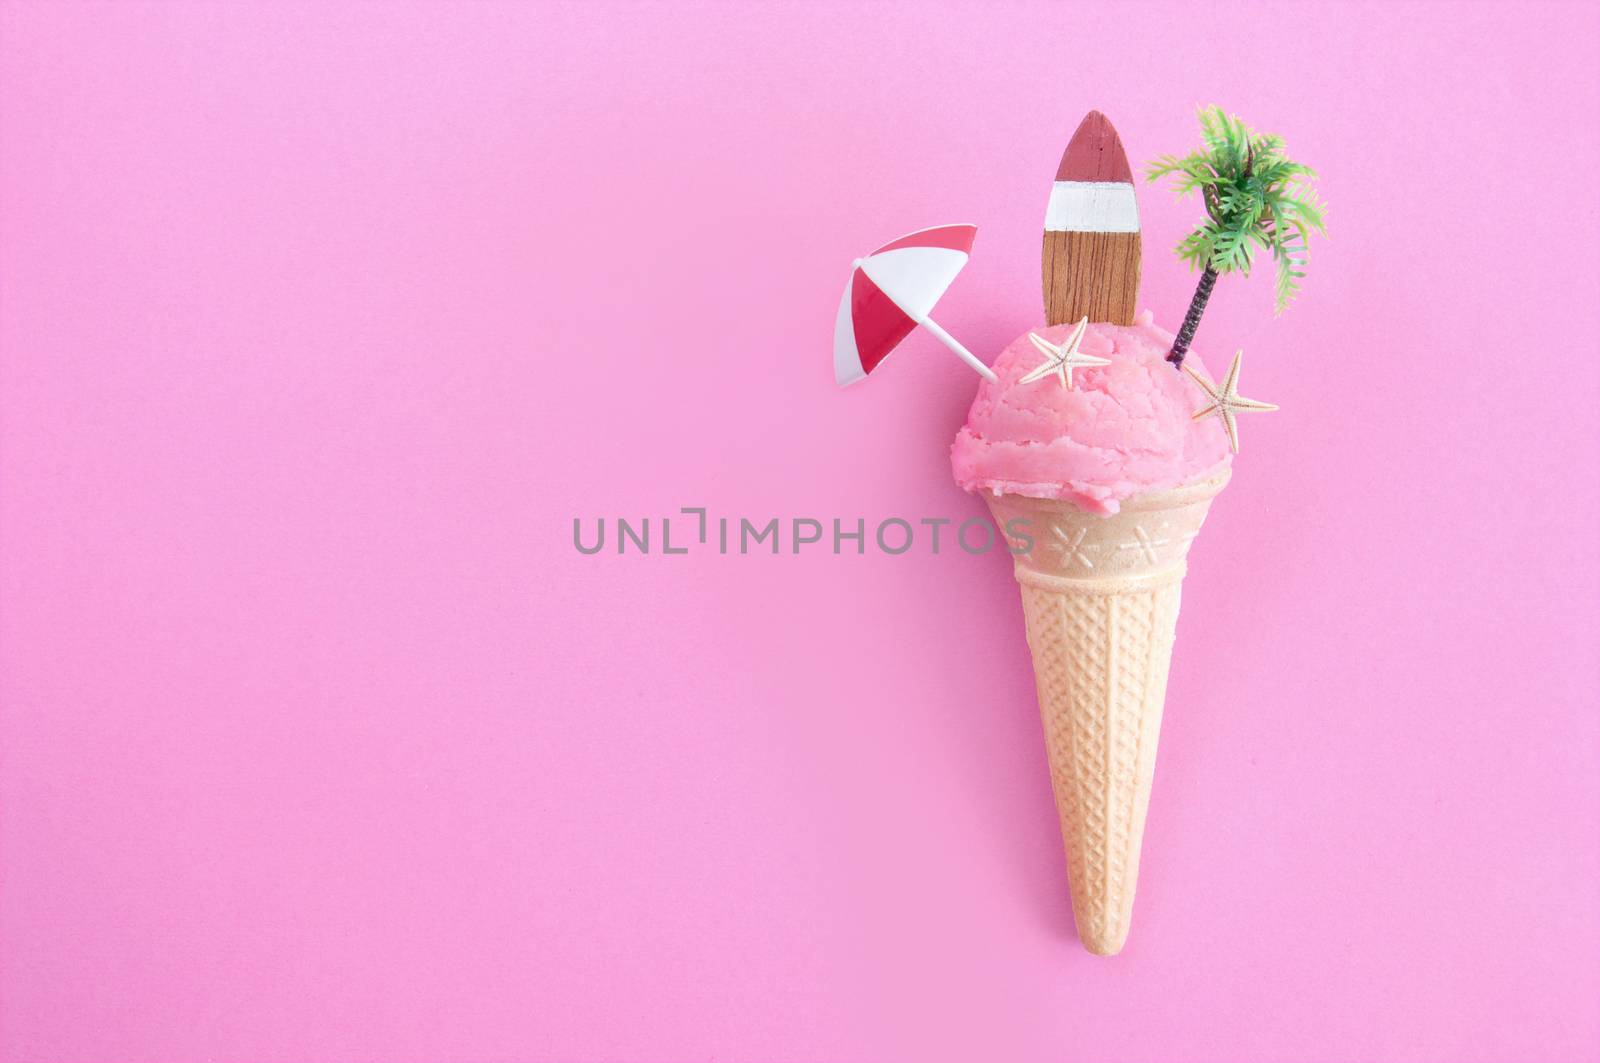 Strawberry icecream with parasol, surfboard and pine tree